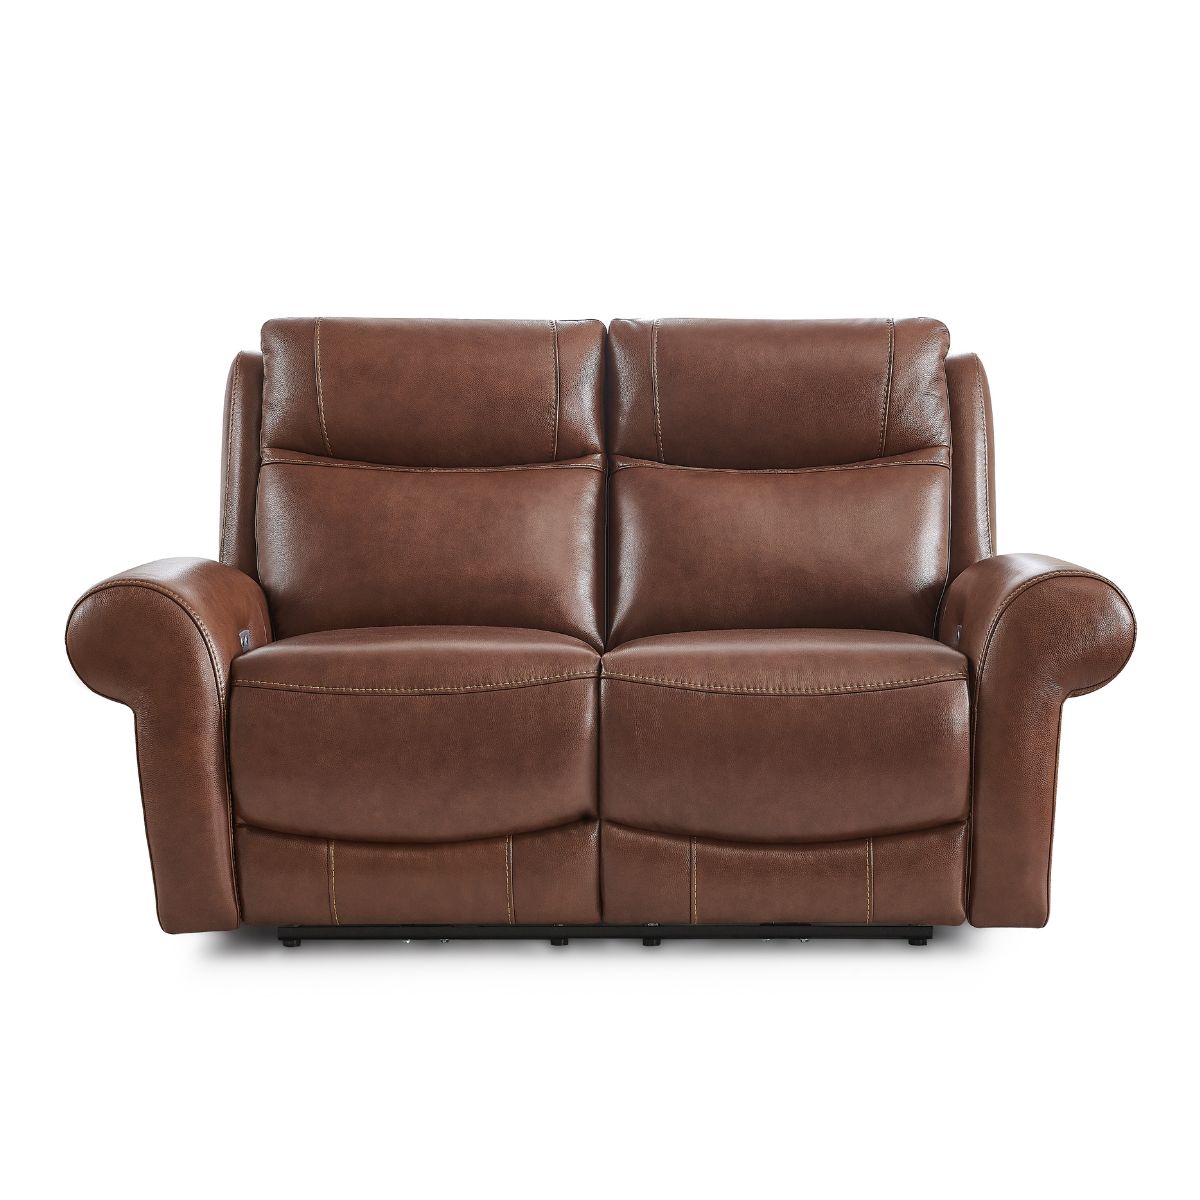 Lindfield Tan Leather 2 Seater Powered Recliner - 1